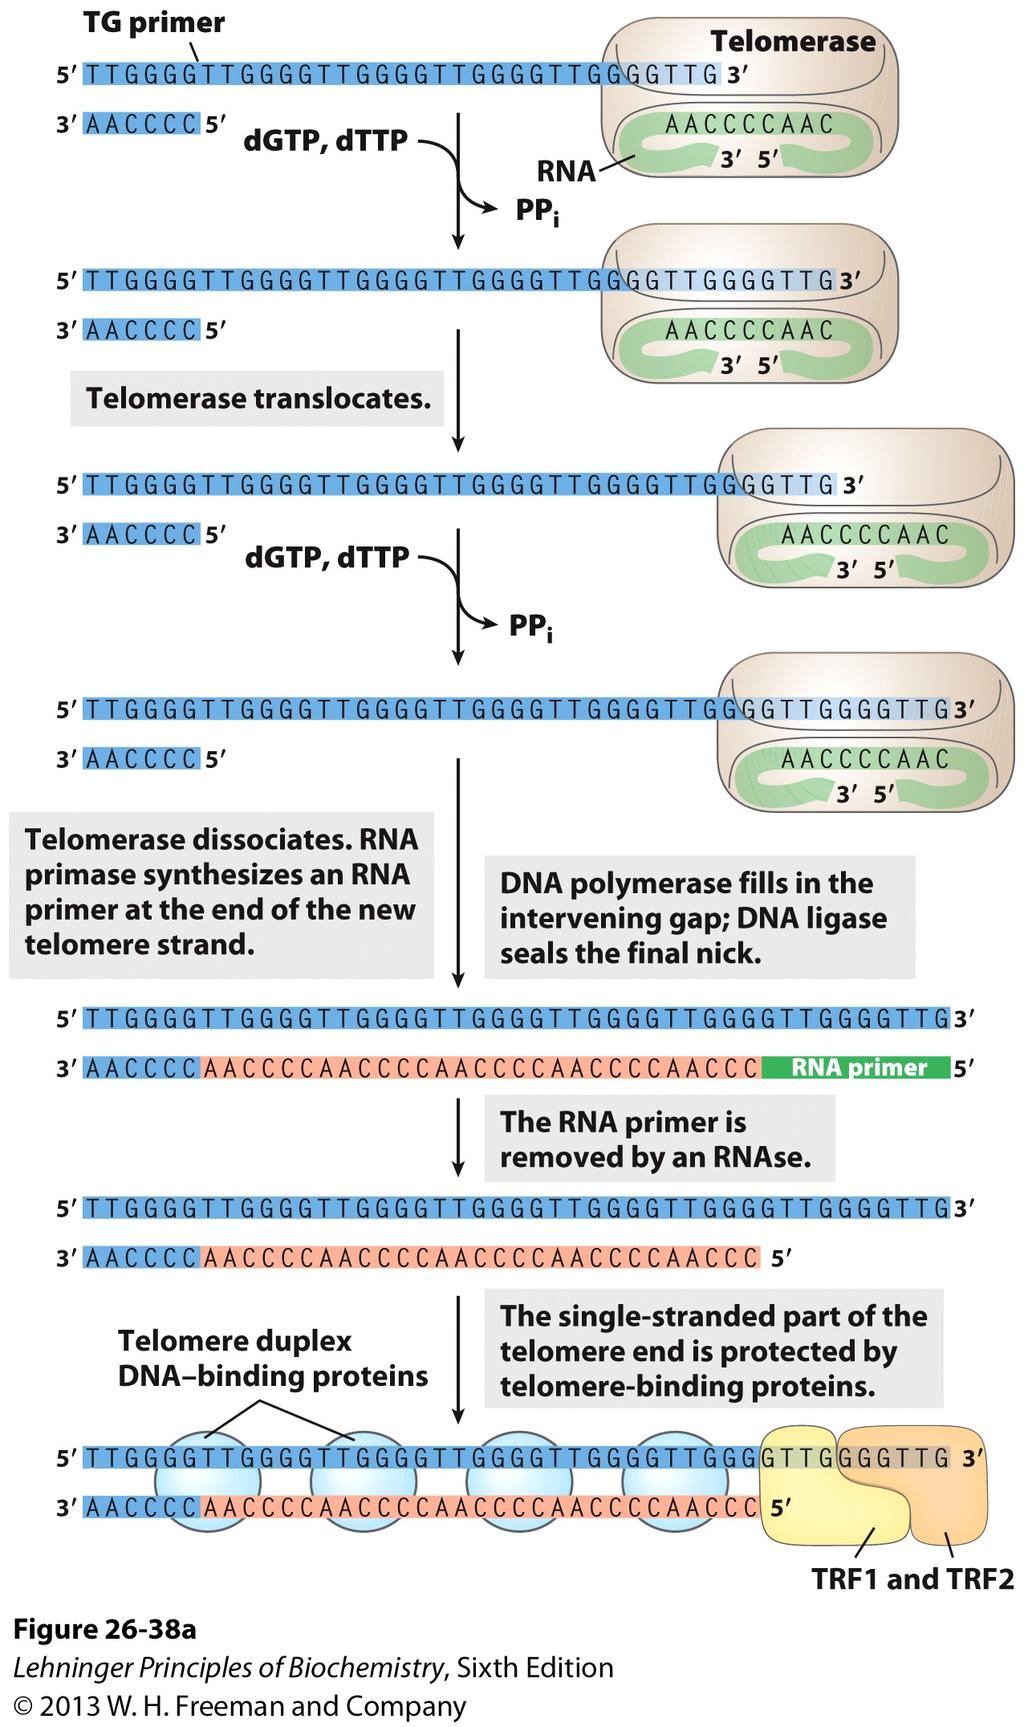 Telomerase adds telomeres! to chromosome ends! Reverse transcription:! RNA-dependent DNA synthesis! Telomerase synthesizes DNA from an RNA template! (a reverse transcriptase)!